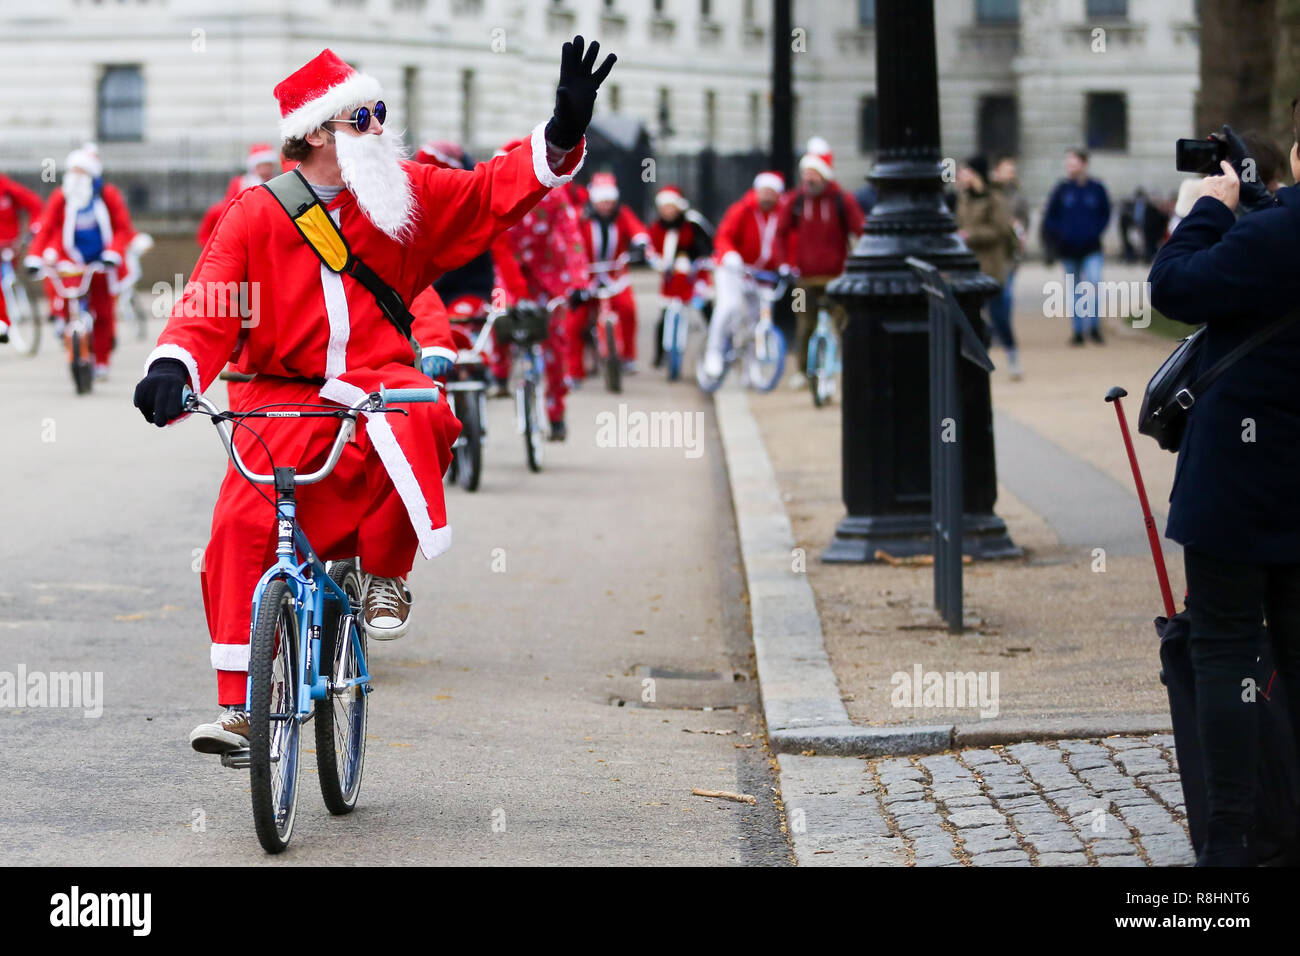 London, UK. 15th Dec, 2018. A man dressed as Father Christmas is seen cycling during the event.Cycling through London to raise awareness and money for Evelina London Children's Hospital (ECHO), for children with heart conditions. The annual event began four years ago after Stephane Wright's son Tommy, suffered a heart attack and spent time at Evelina London. Tommy was only 6 months old when he suffered a heart attack and nearly died. Fortunately Tommy recovered well but will require further operations as he grows up, so will be returning to the Evelina London in time. (Cred Stock Photo